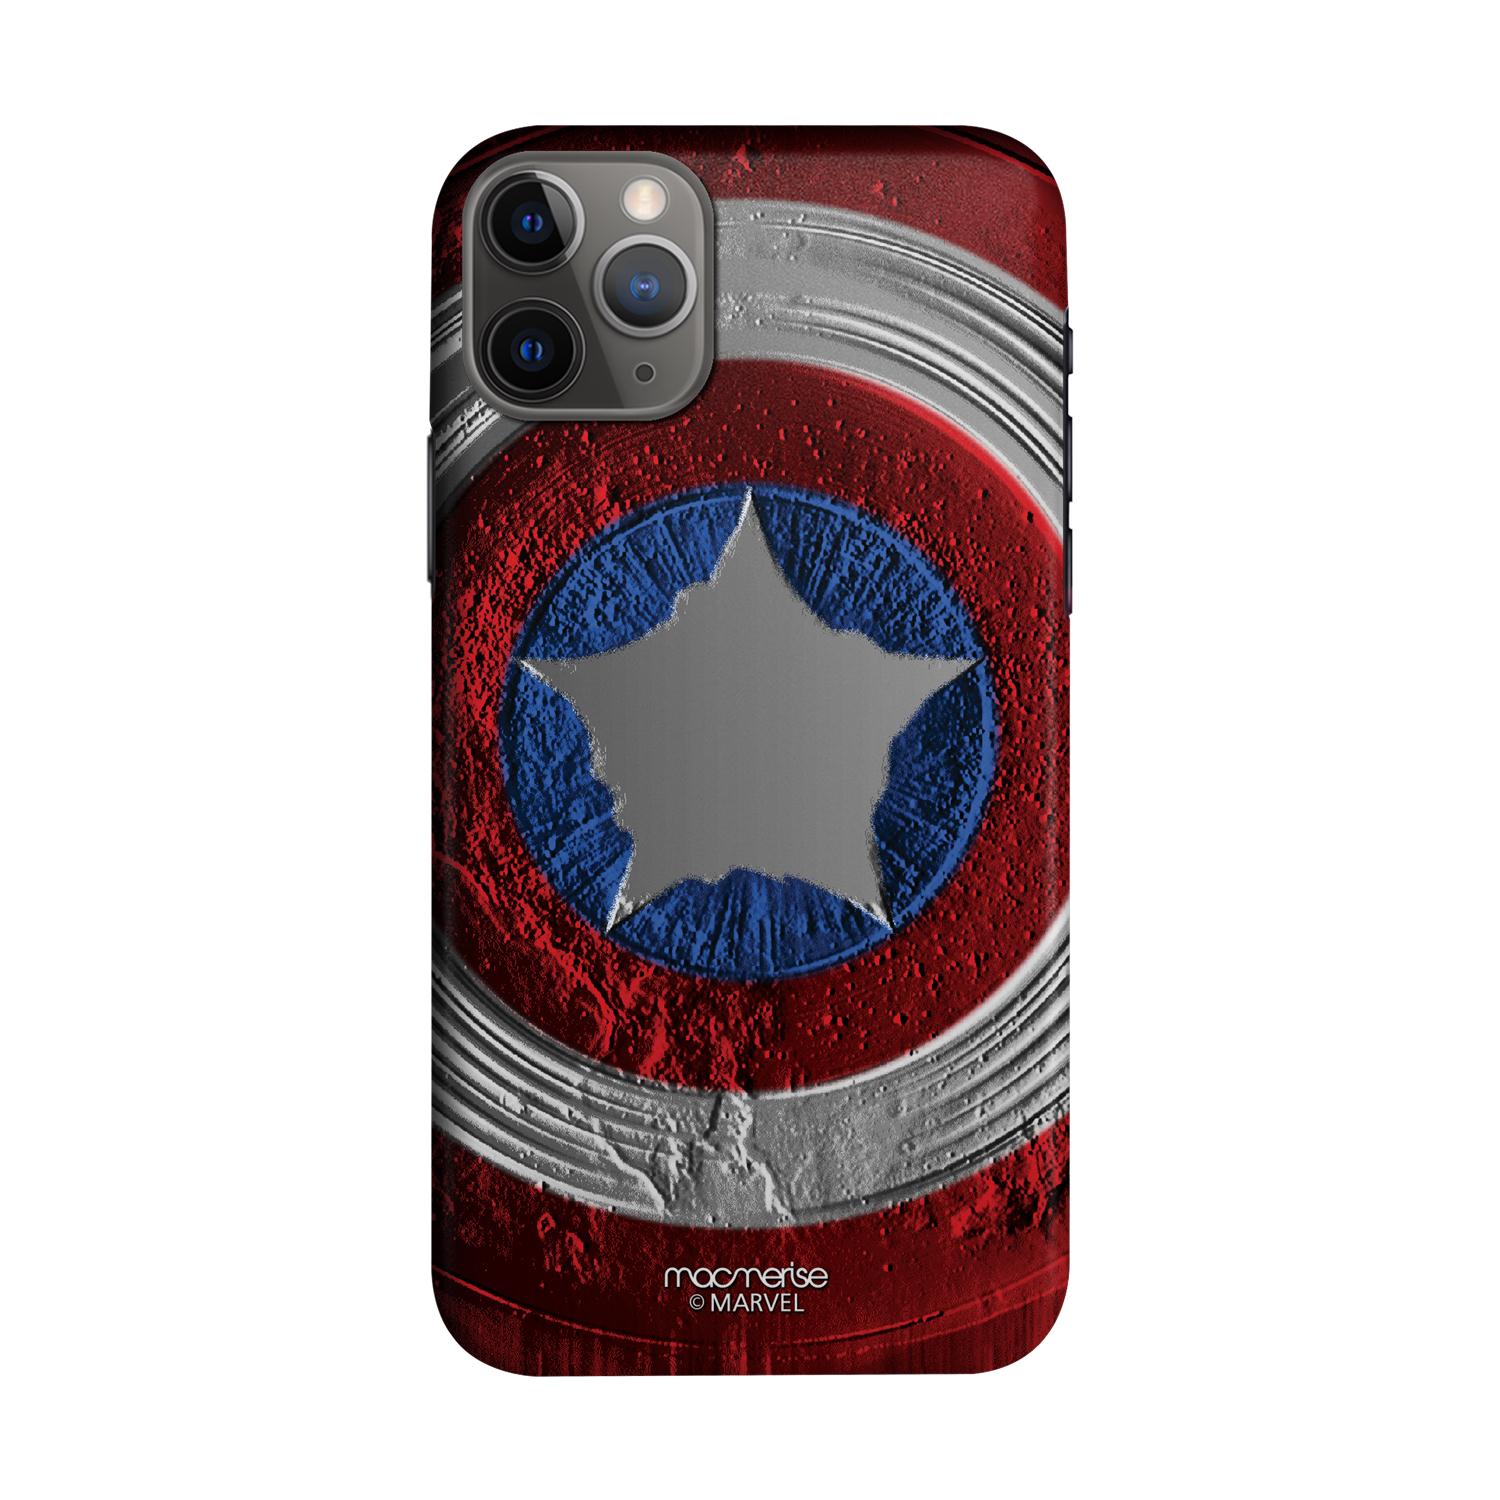 Stoned Shield - Sleek Phone Case for iPhone 11 Pro Max